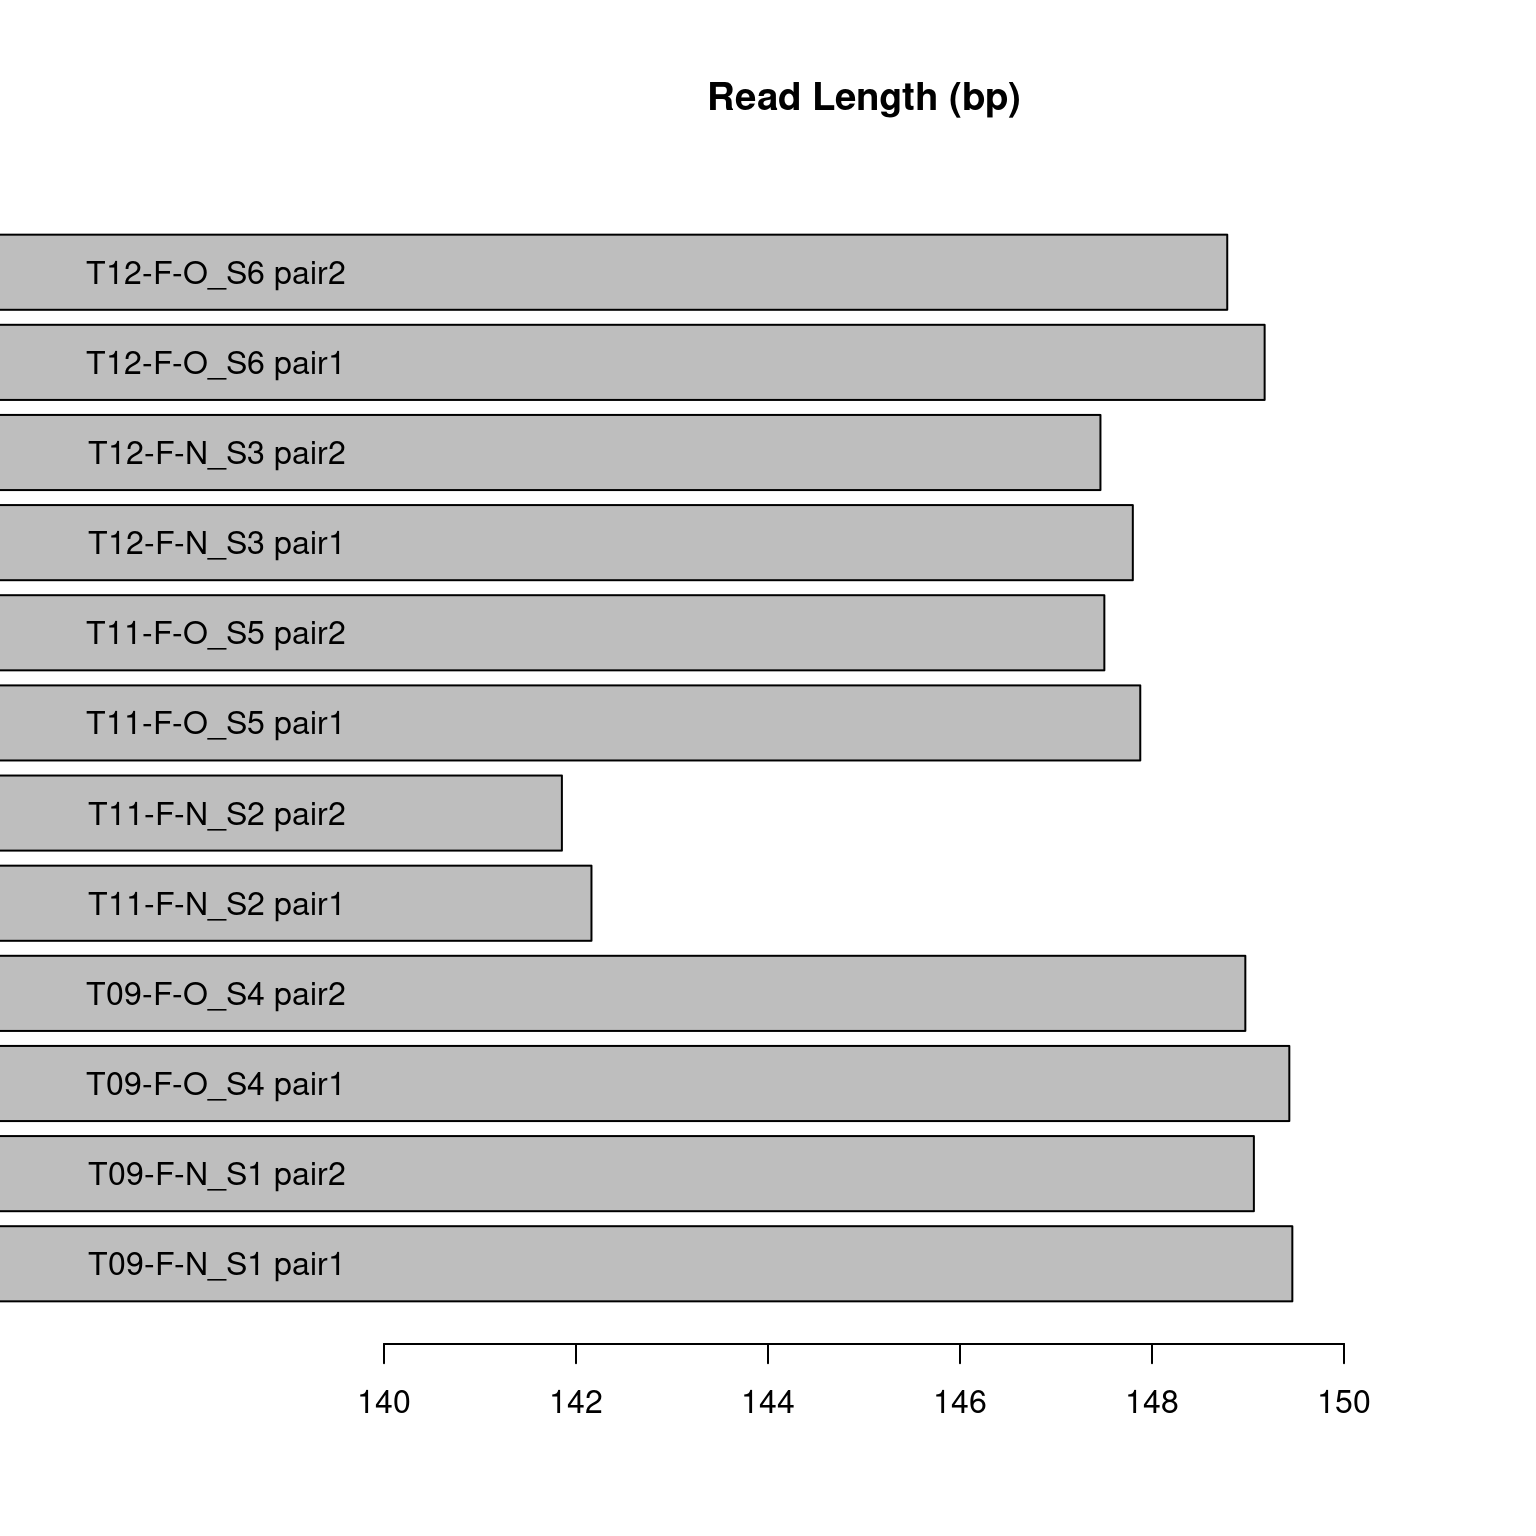 Figure displaying the mean read length in base pairs for each sample pair in the pilot study. The samples labeled “pair2” are the forward reads and the samples labeled “pair1” are the reverse reads.